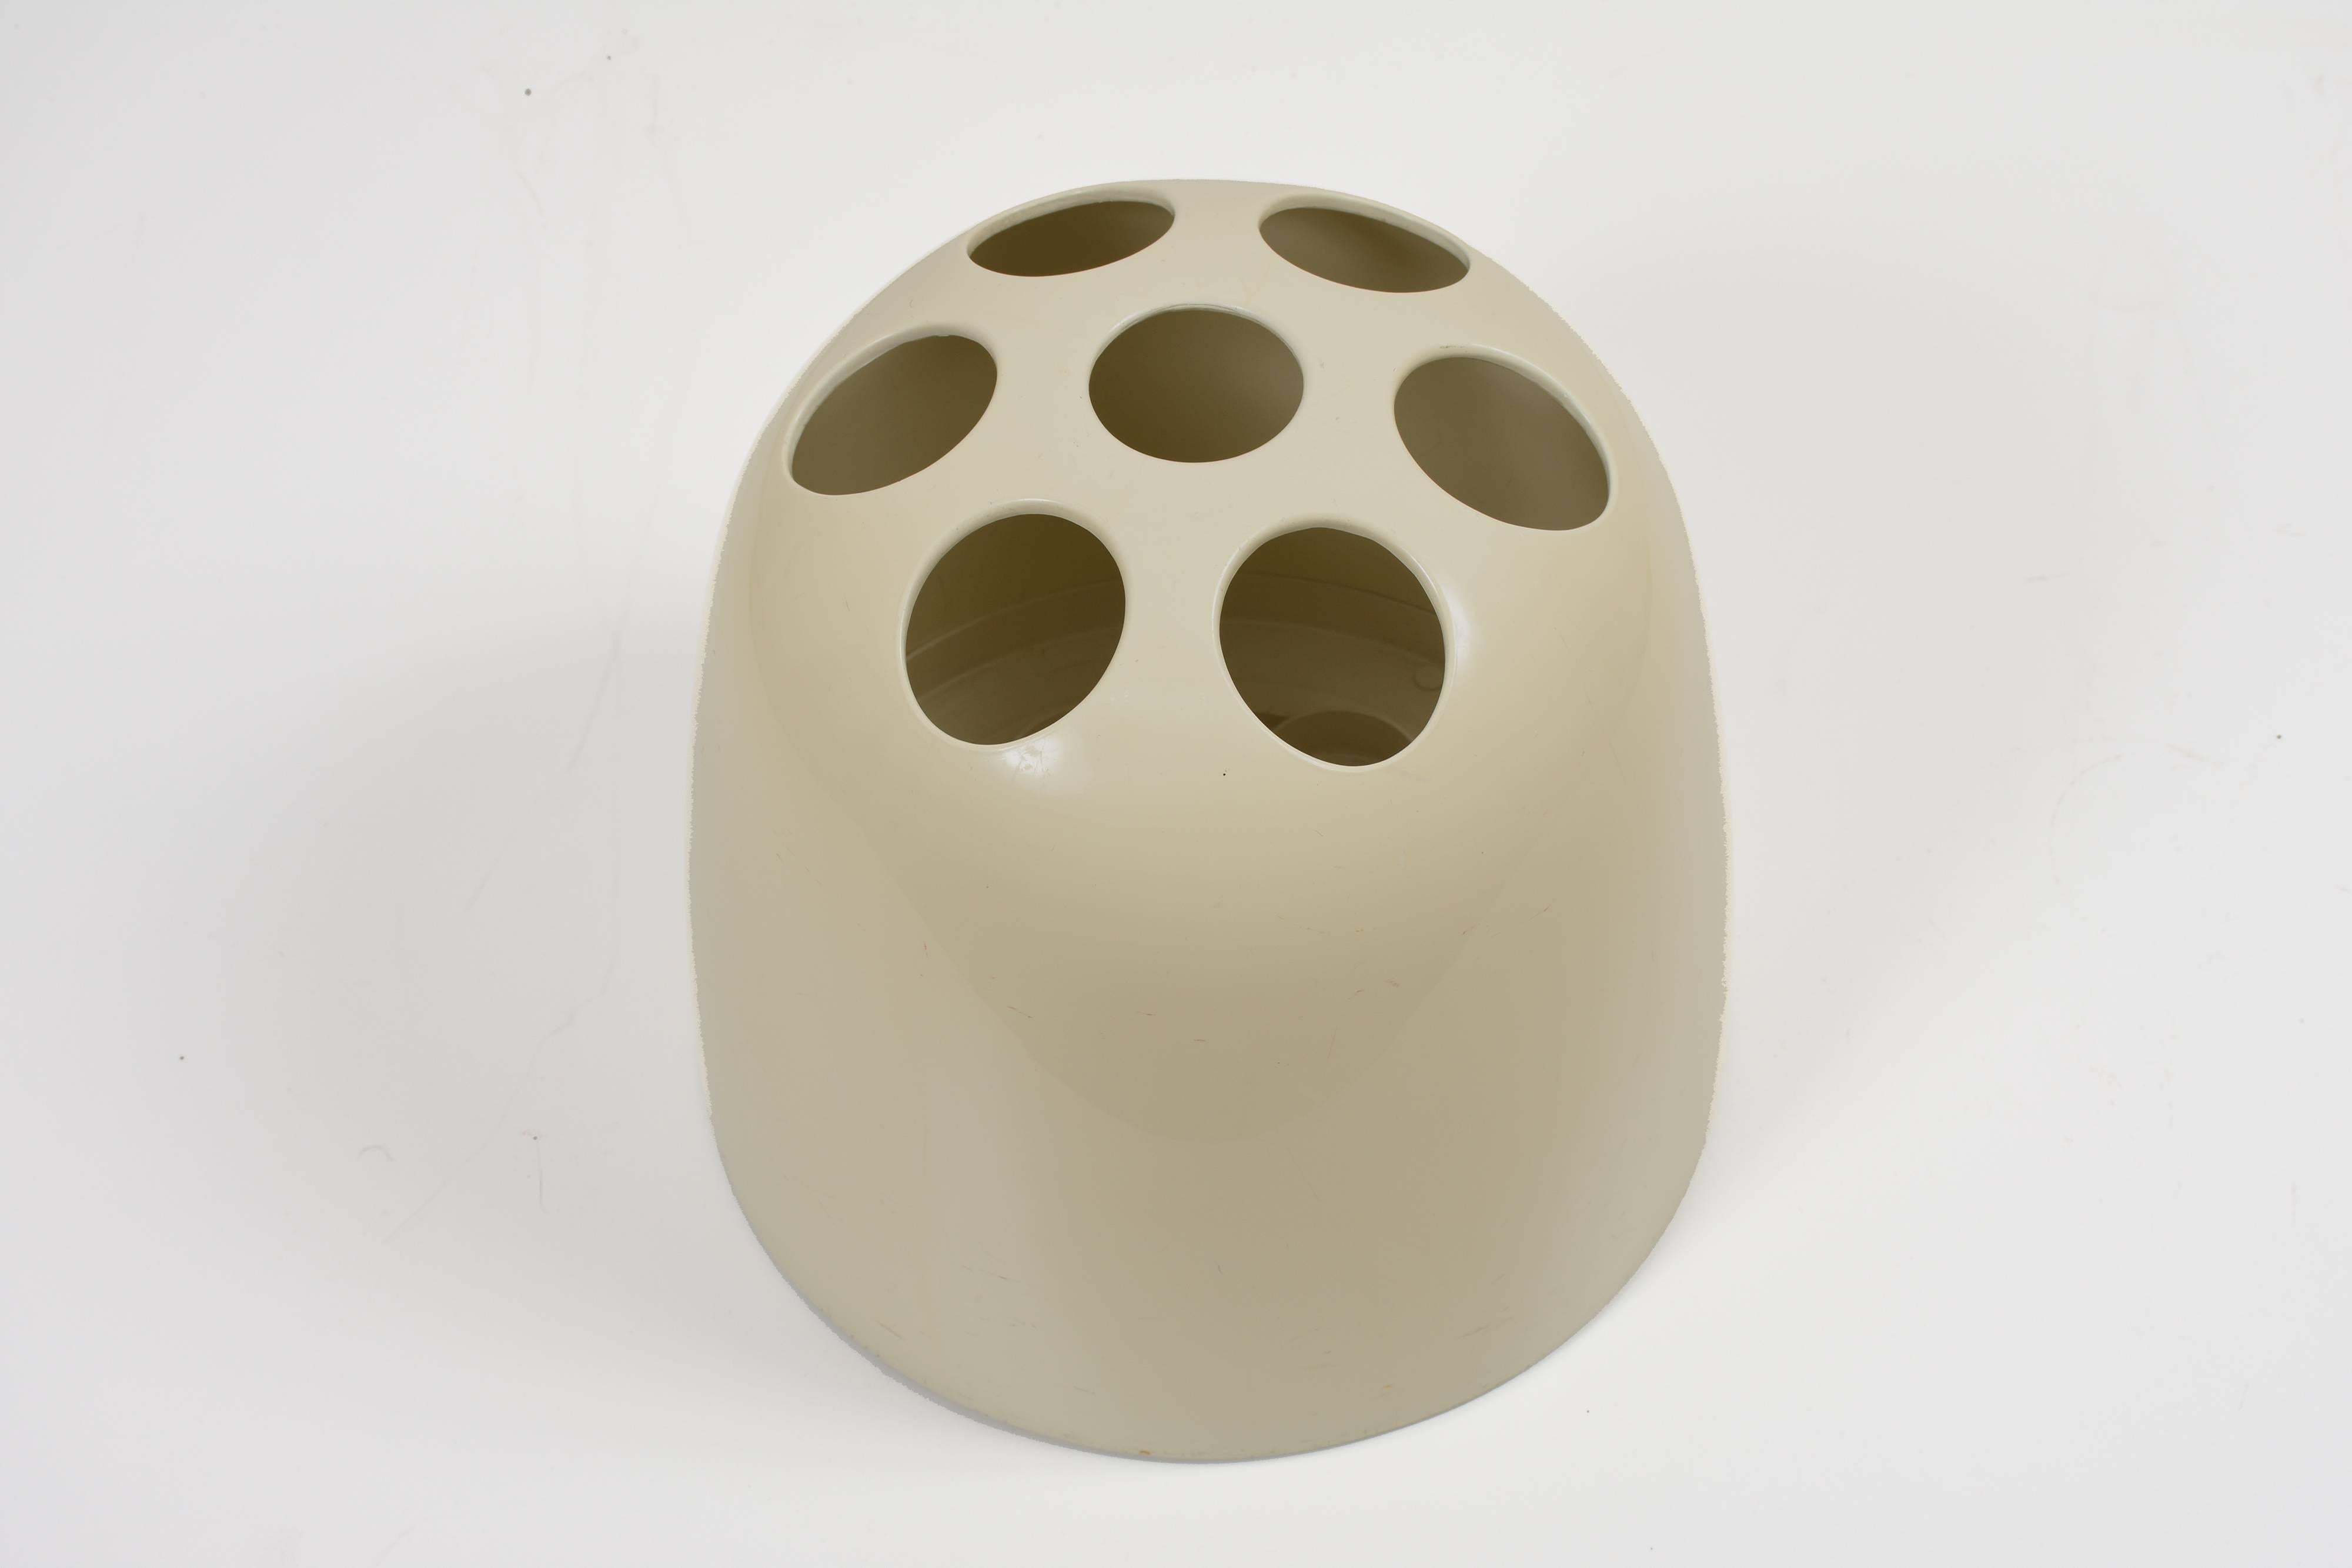 This umbrella stand, model Dedalo, was designed by Emma Gismondi Schweinberger and manufactured by Artemide in 1966. It is made from ABS plastic in cream. The original object was produced in three different sizes: small pencil holders (Dedalino),